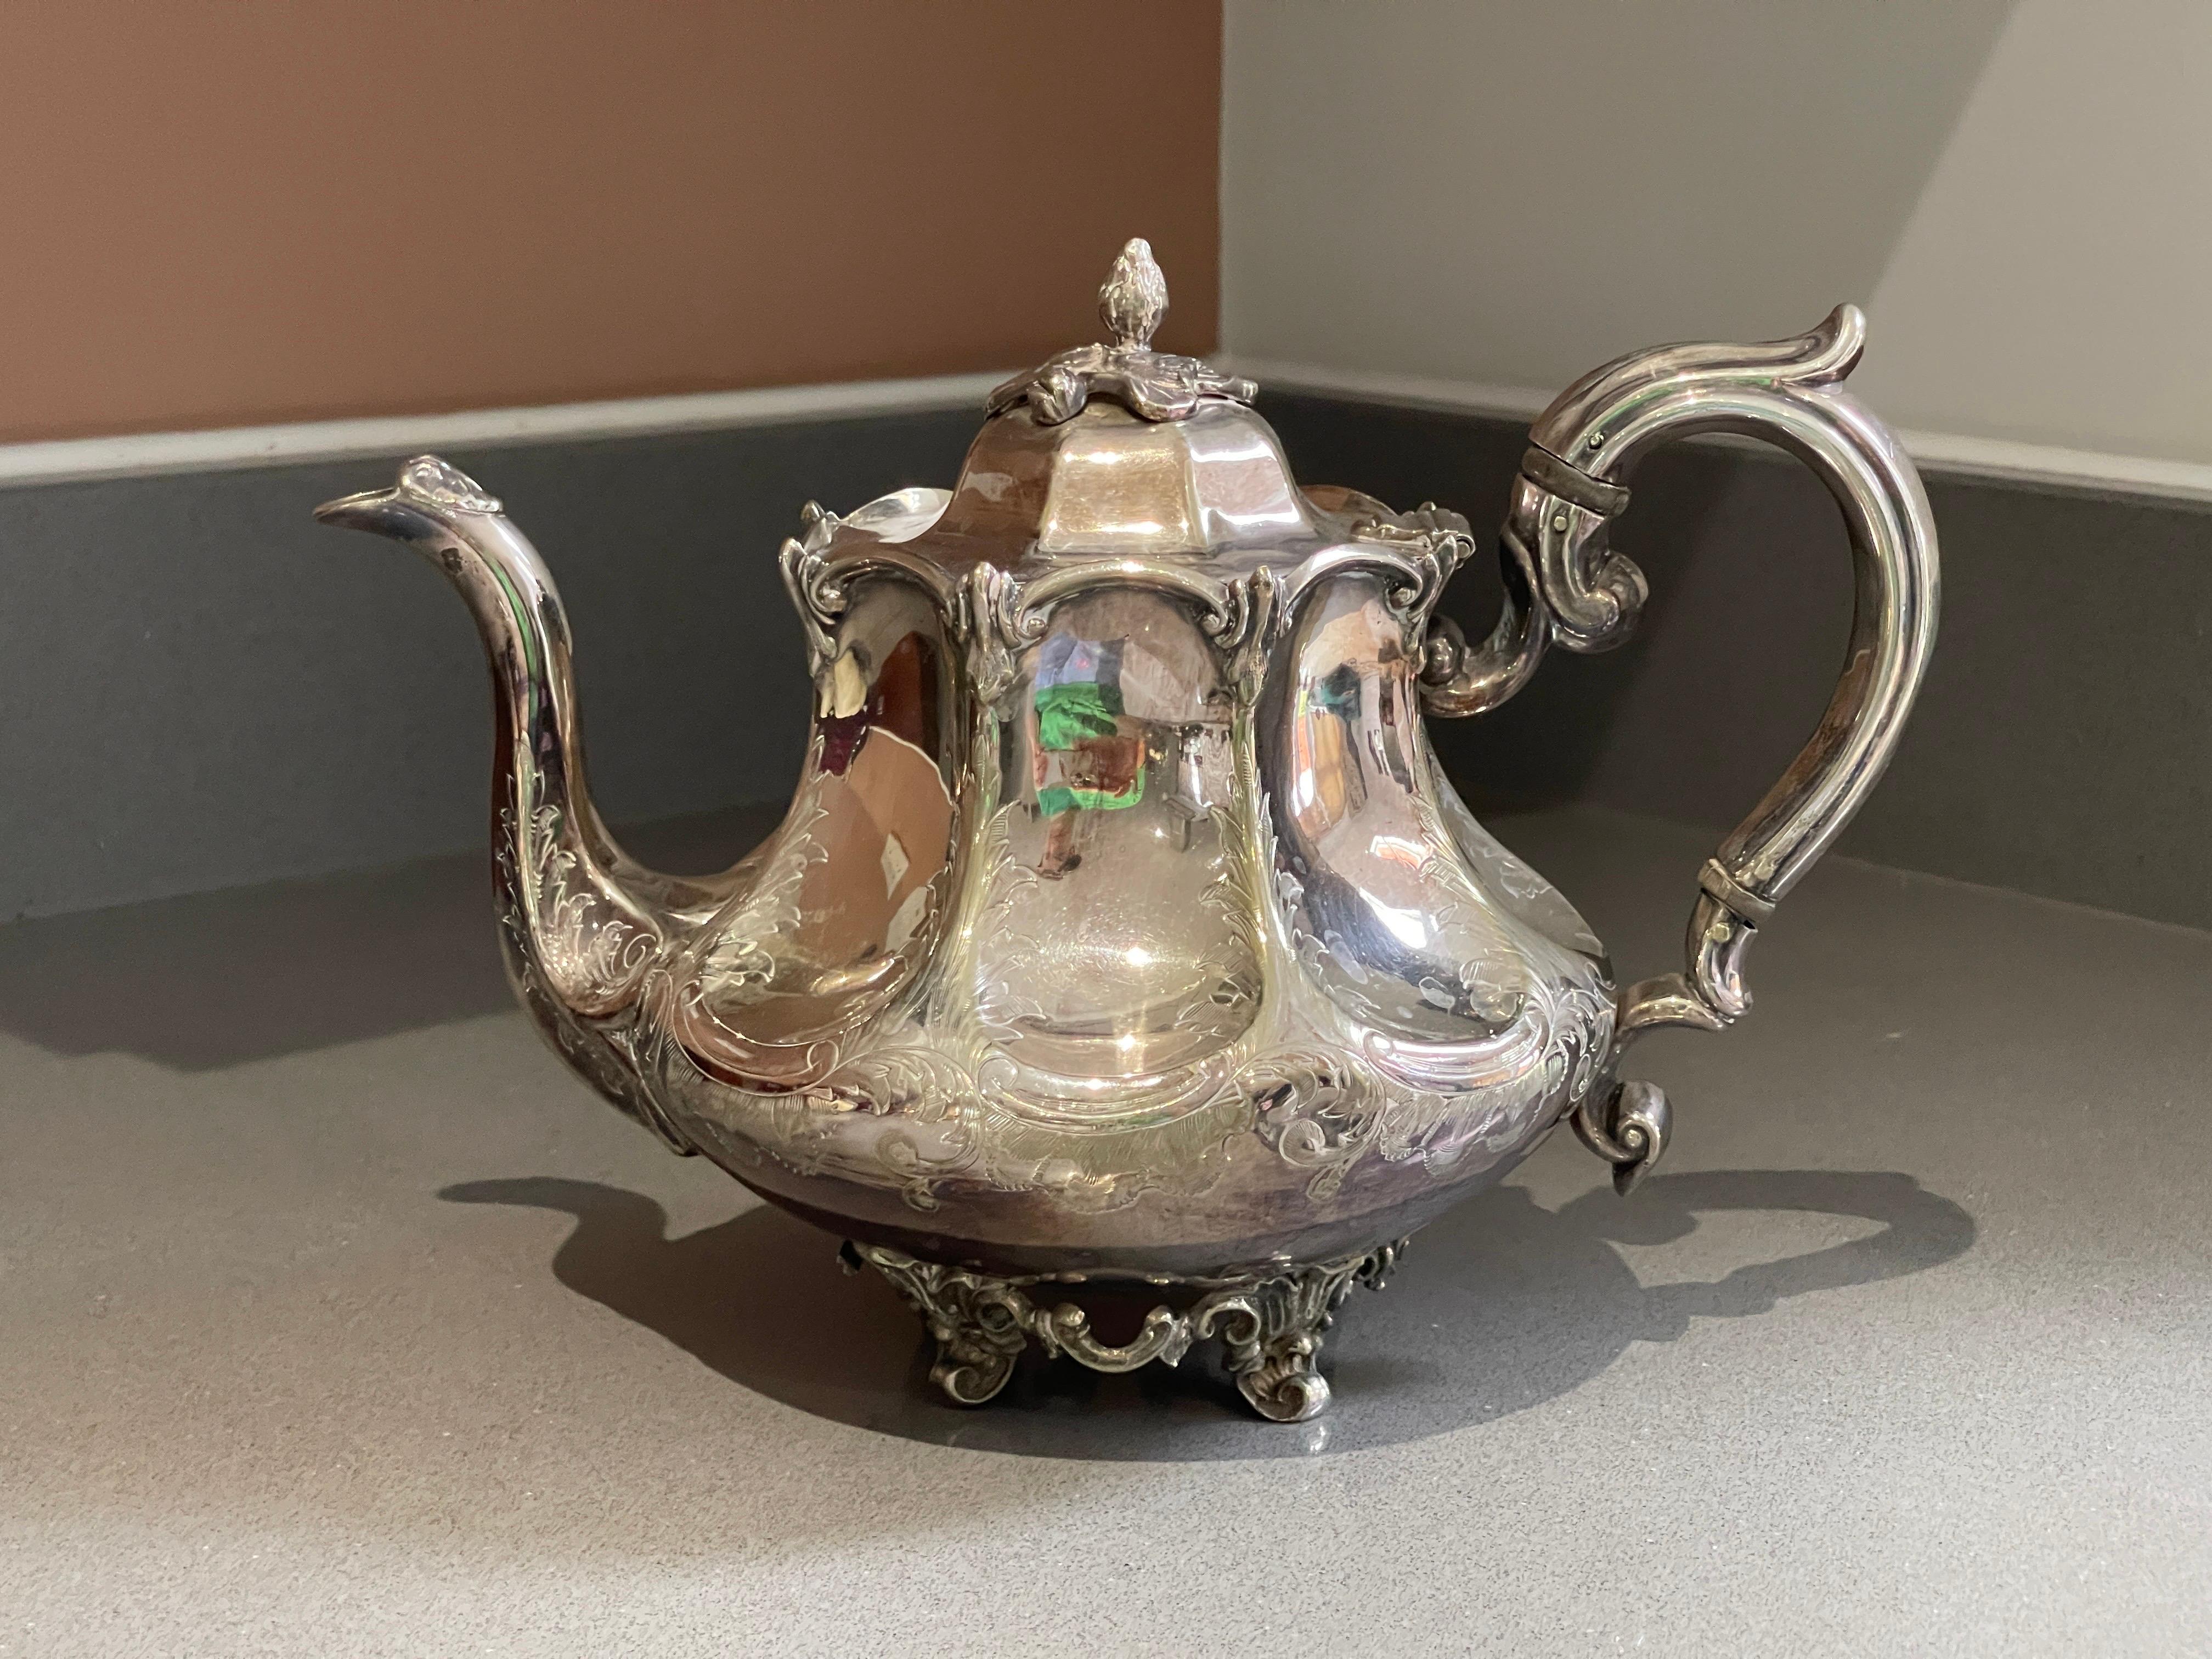 An antique tea set and a silver-plated teapot that is beautifully designed and created are suitable for elegant serving. With lid pressed, cast and chased, gold gilding on the inside. Oval, domed body on short, curved feet with hinged, vaulted lid.